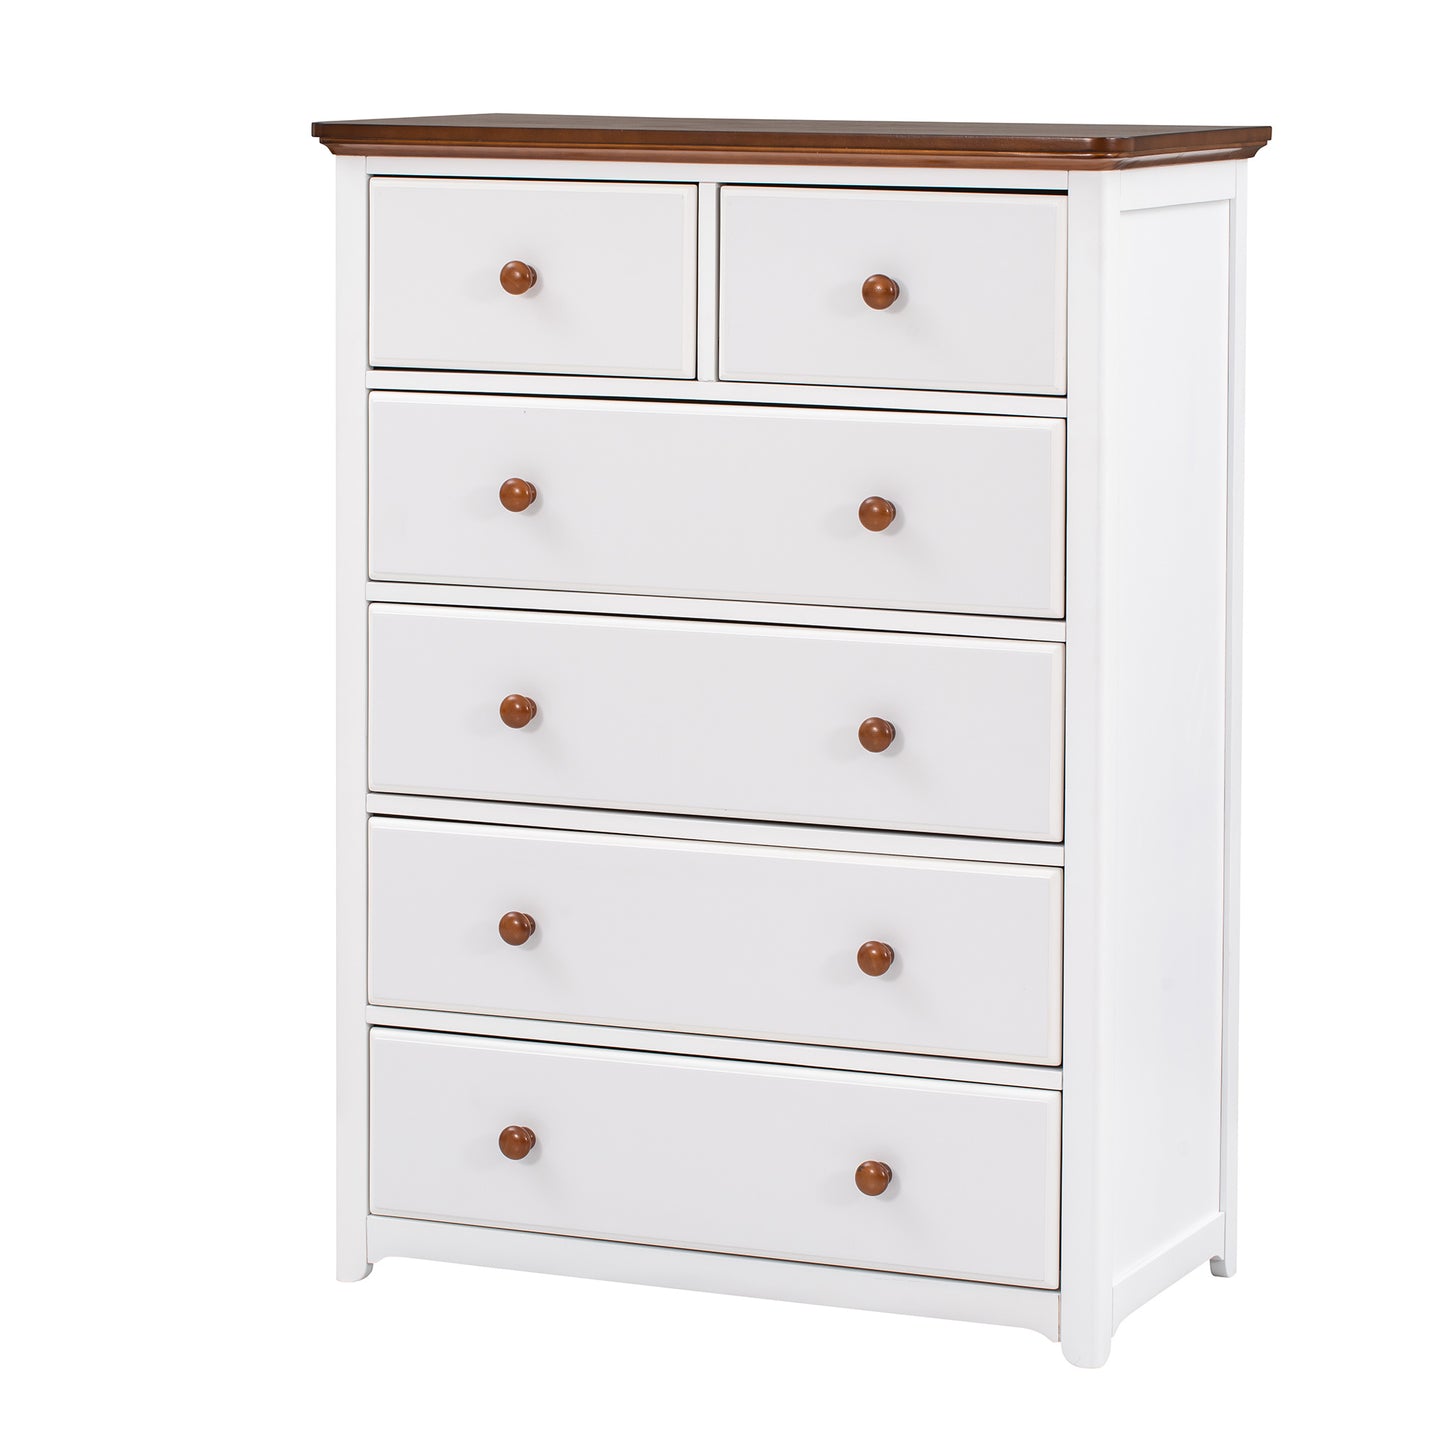 3-pieces bedroom sets  with nightstand(usb charging ports) and storage chest,white+walnut